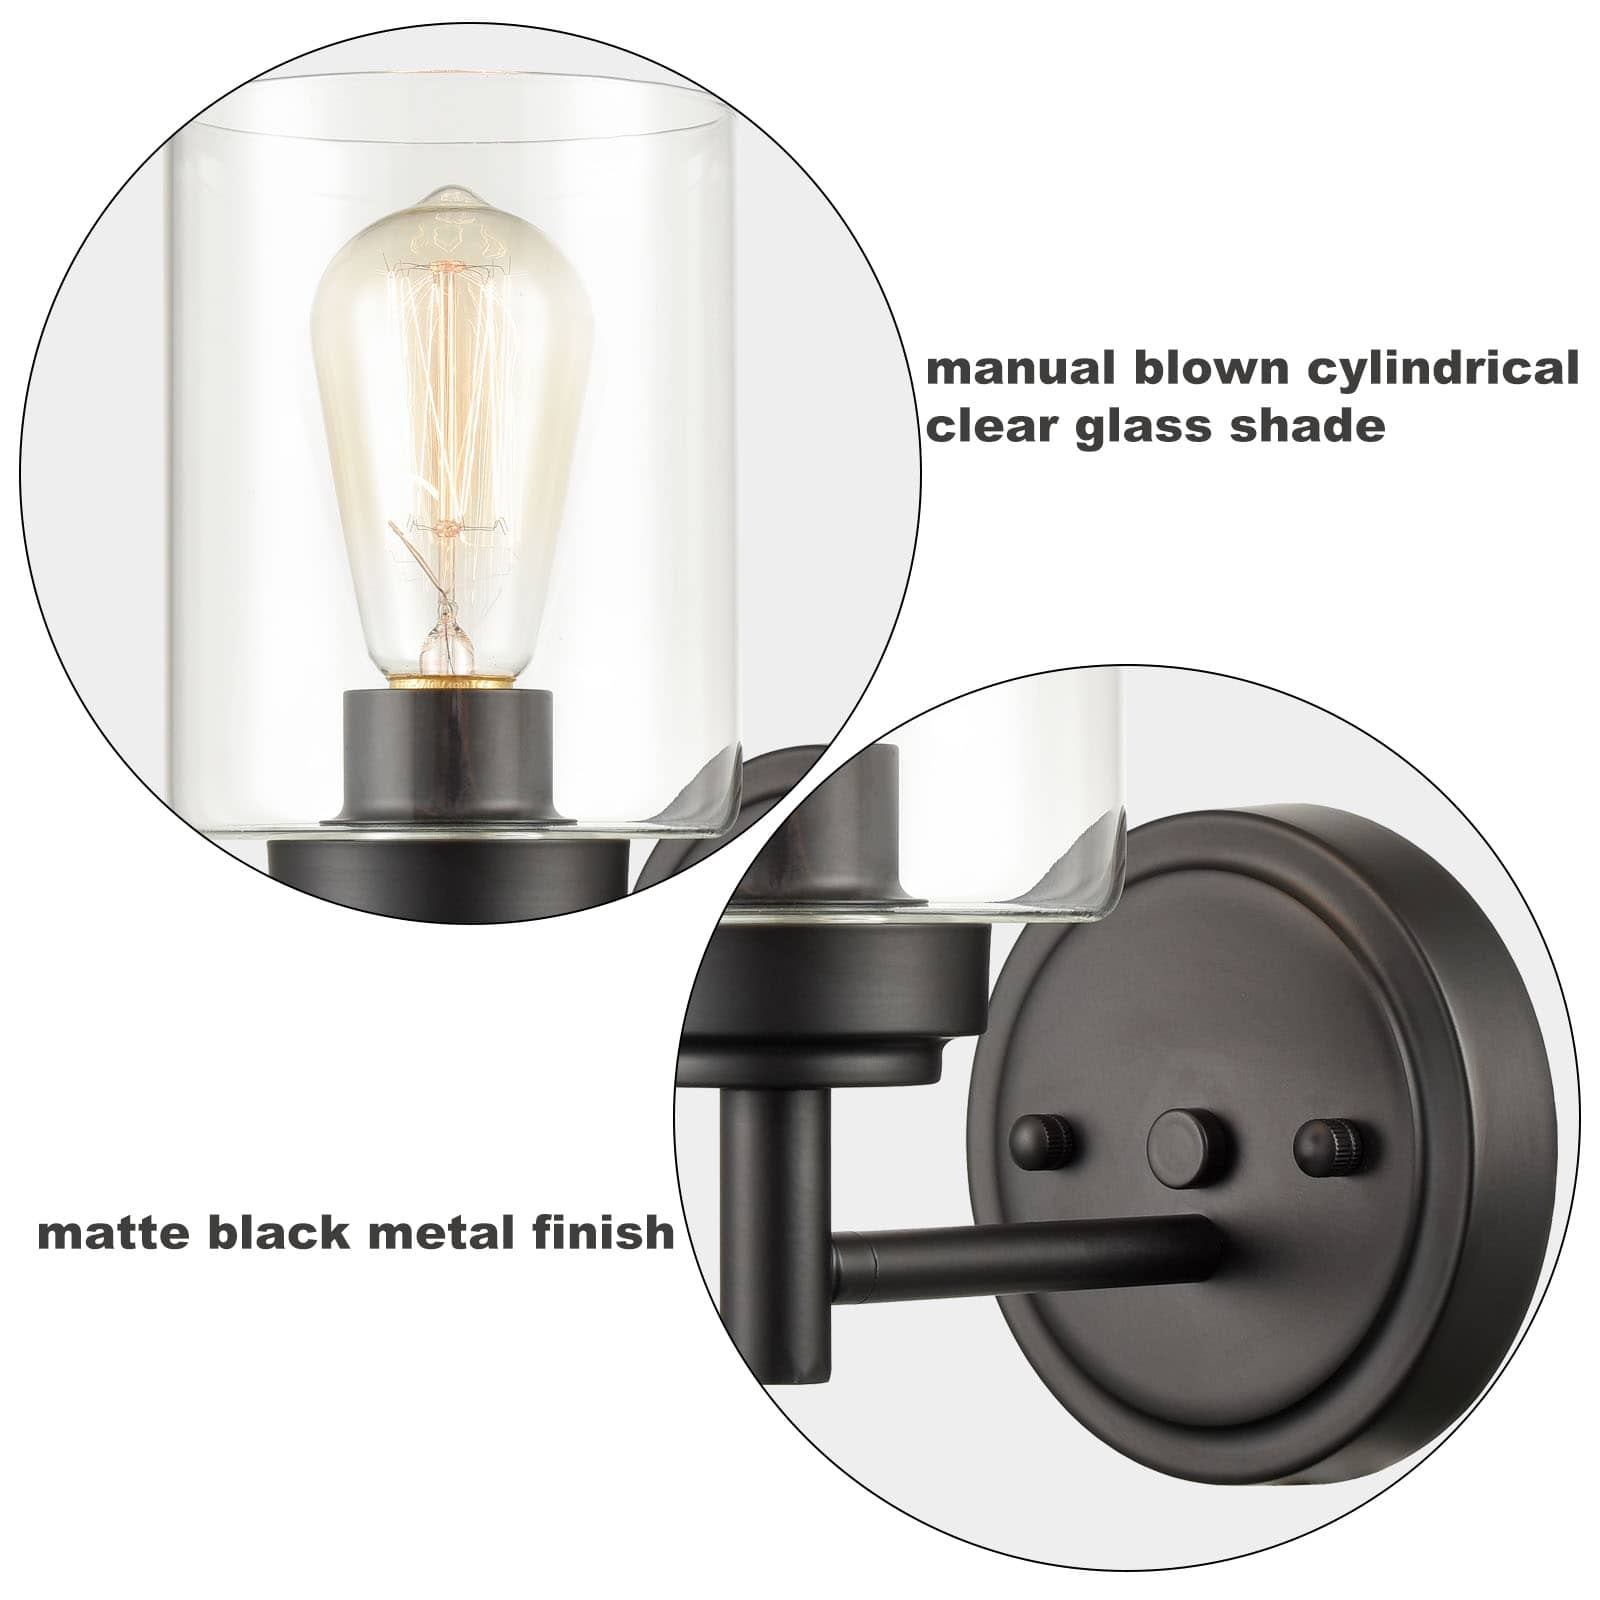 Set of 2 Modern Black Metal Wall Sconce with Cylindrical Clear Glass Shade for Bathroom